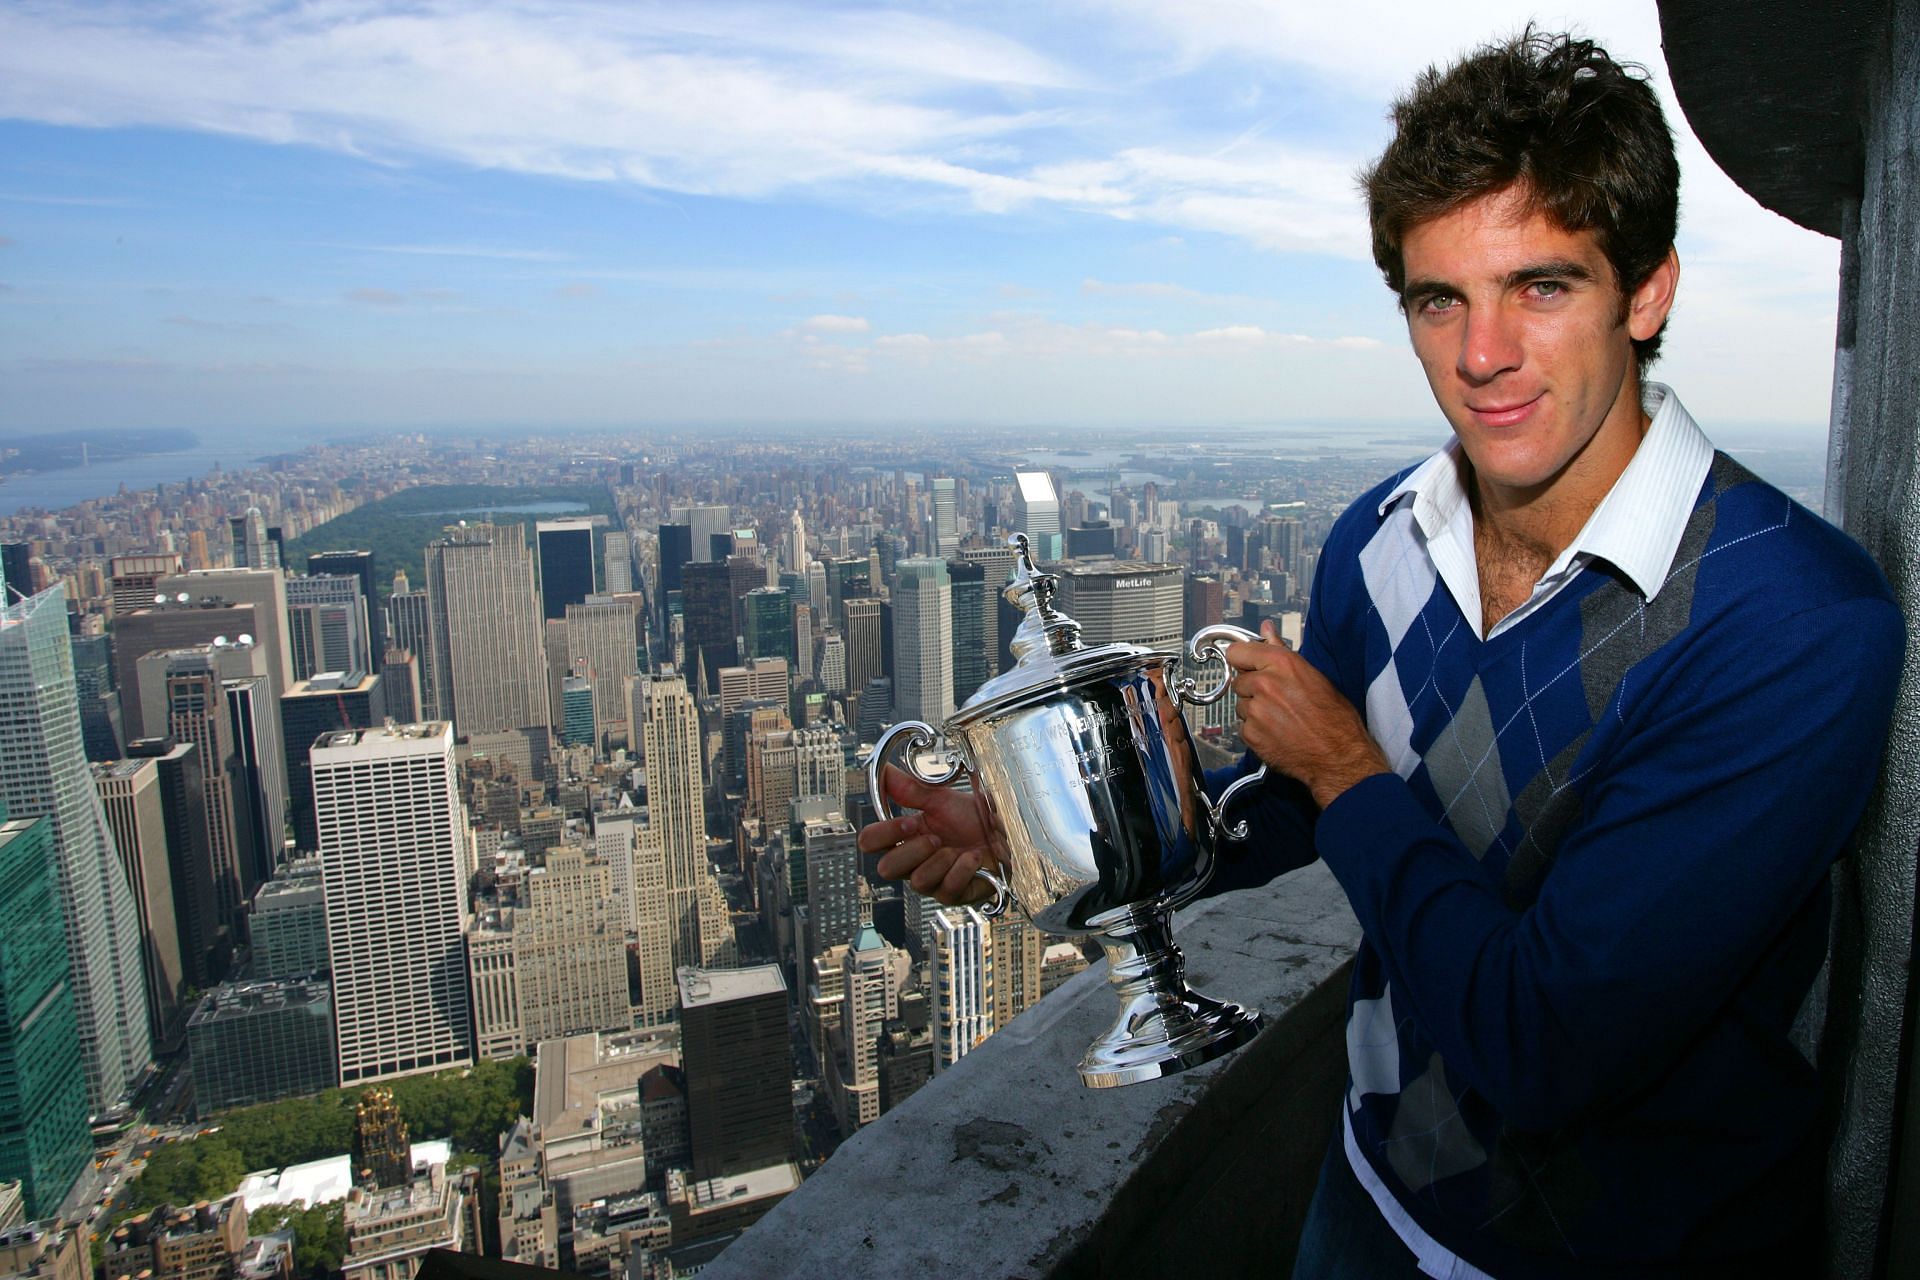 Juan Martin Del Potro was the first player to defeat both Roger Federer and Rafael Nadal in a Grand Slam